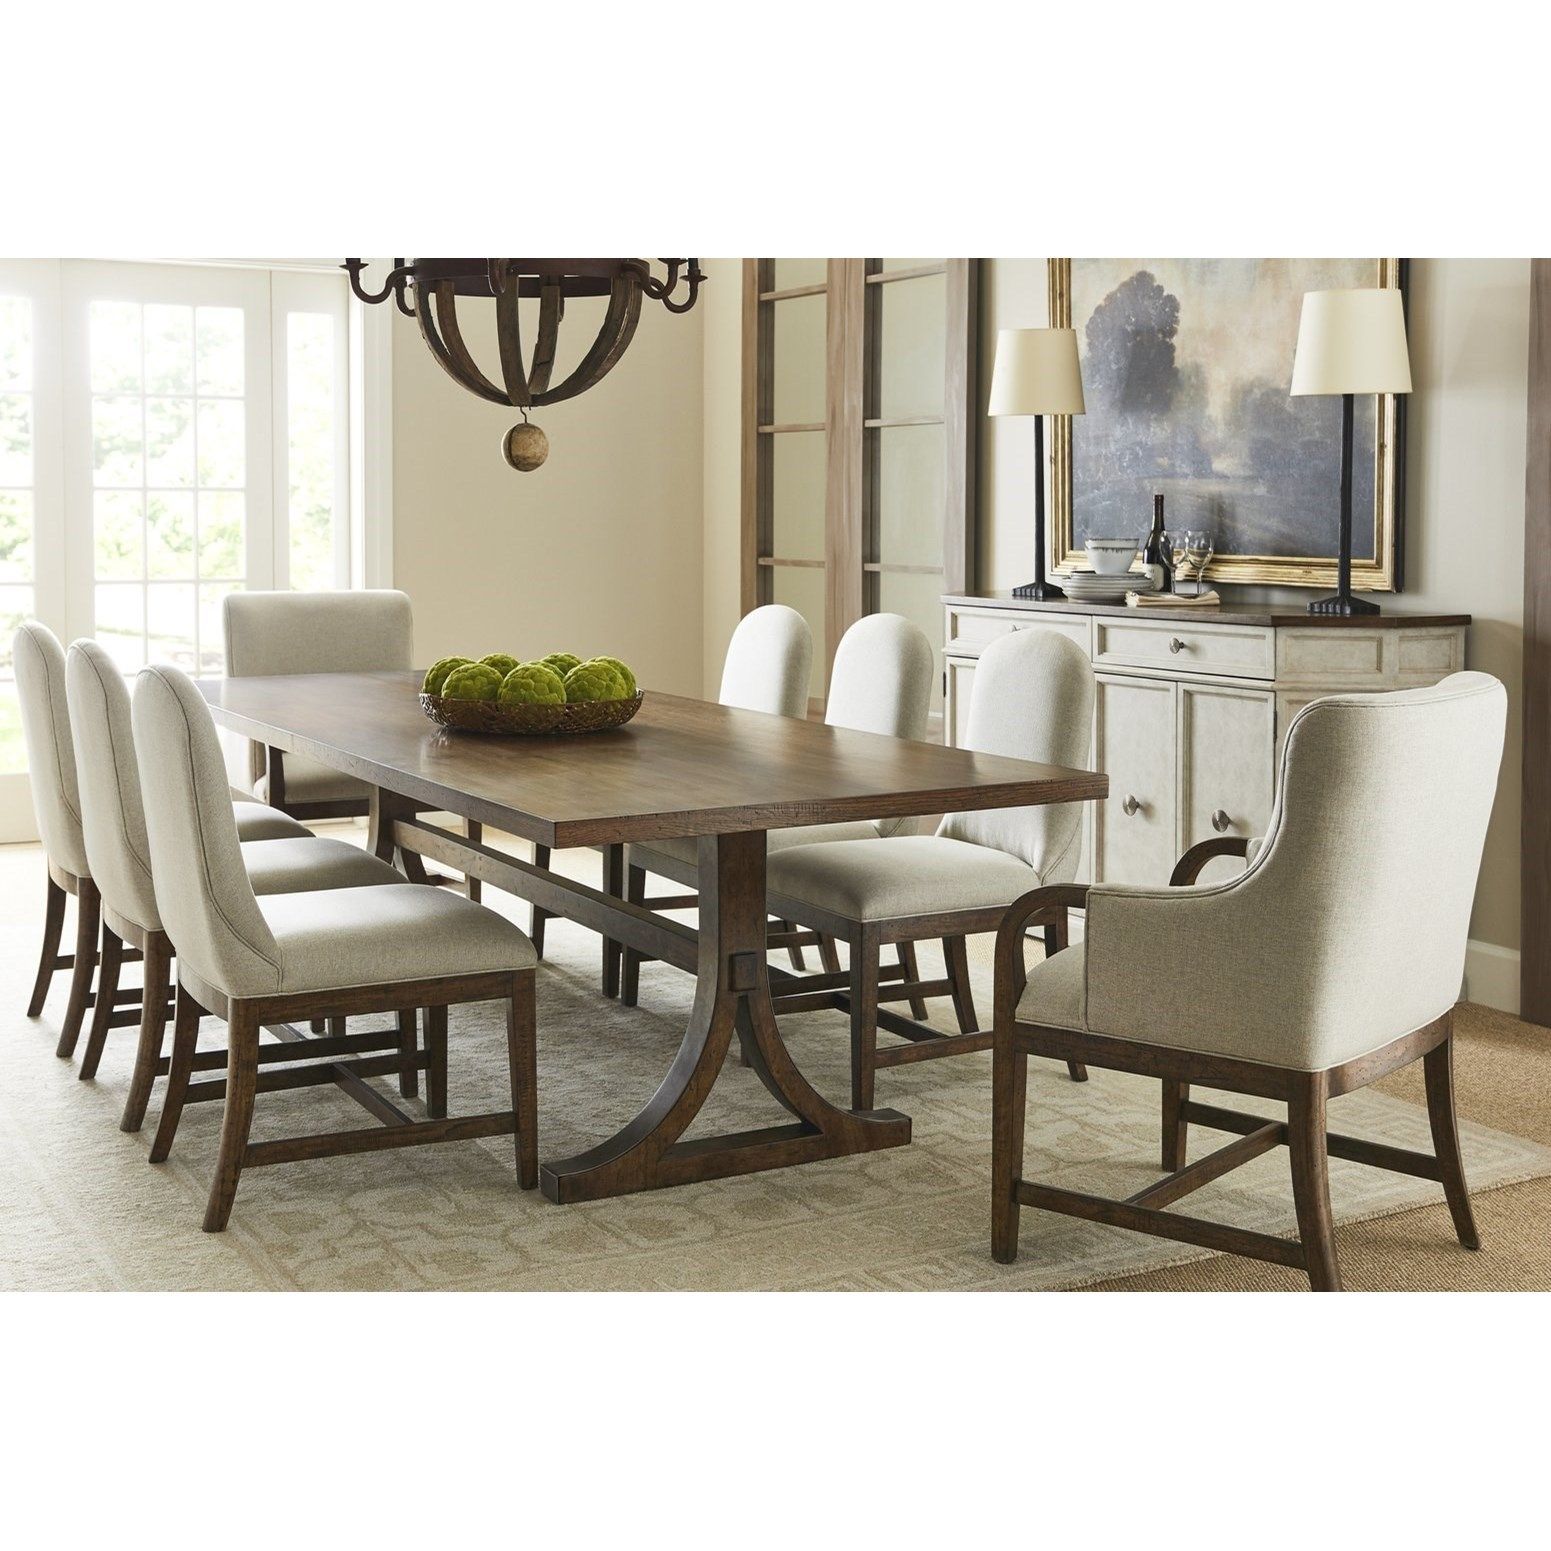 Stanley Furniture Hillside Transitional 9 Piece Dining Set | Dunk In 9 Piece Oval Dining Sets (View 7 of 15)